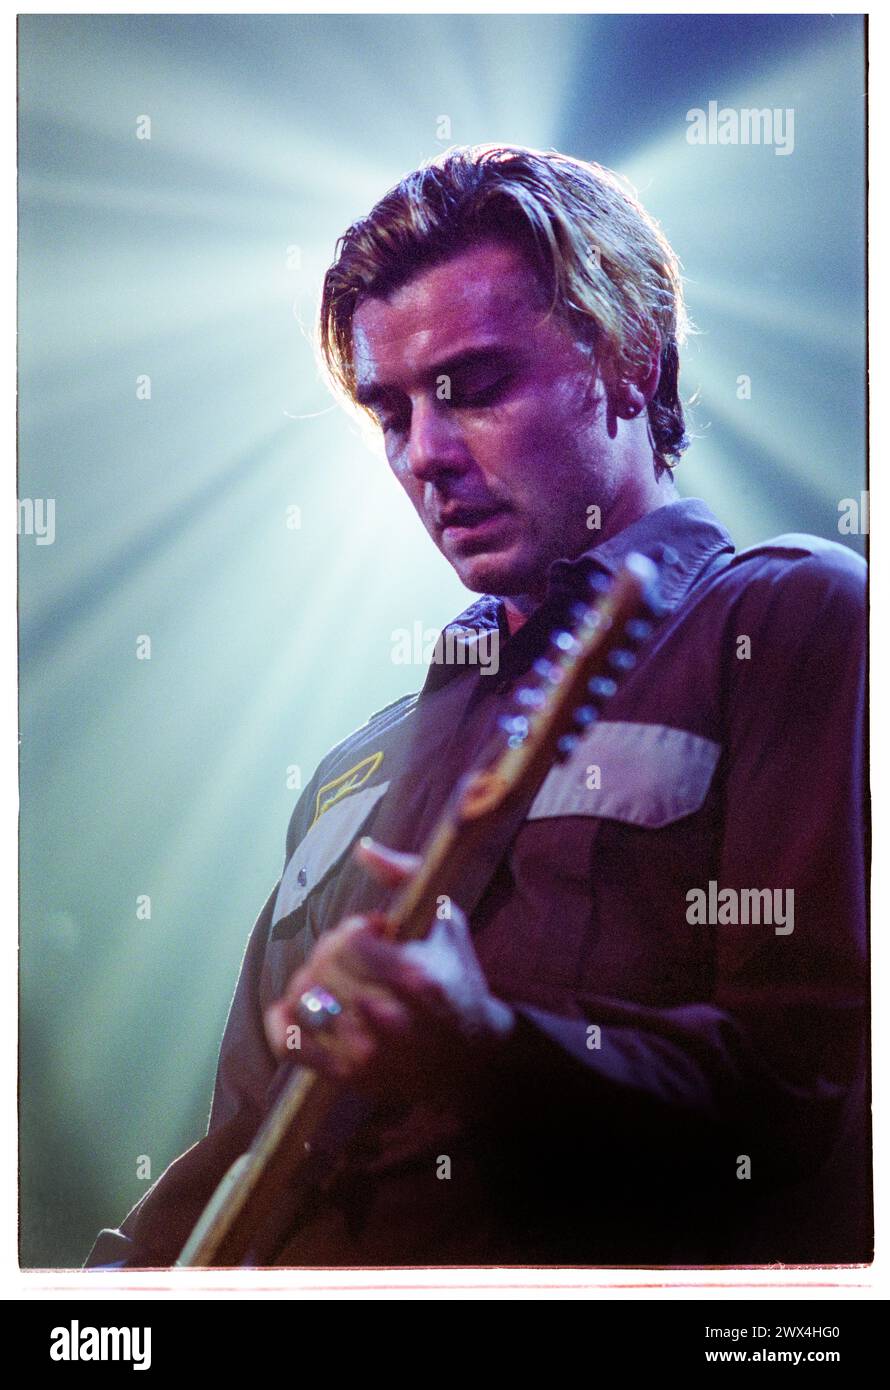 GAVIN ROSSDALE, BUSH, 2001 CONCERT: Gavin Rossdale of the English rock band Bush playing in their original lineup before a 10 year hiatus touring with the 'Golden State' album at Newport Centre in Newport, Wales, UK on 25 November 2001. Photo: Rob Watkins. INFO: Bush, an English rock band formed in 1992, soared to fame with hits like 'Glycerine' and 'Machinehead.' Their grunge-inspired sound, led by Gavin Rossdale's emotive vocals, resonated with audiences worldwide. Stock Photo